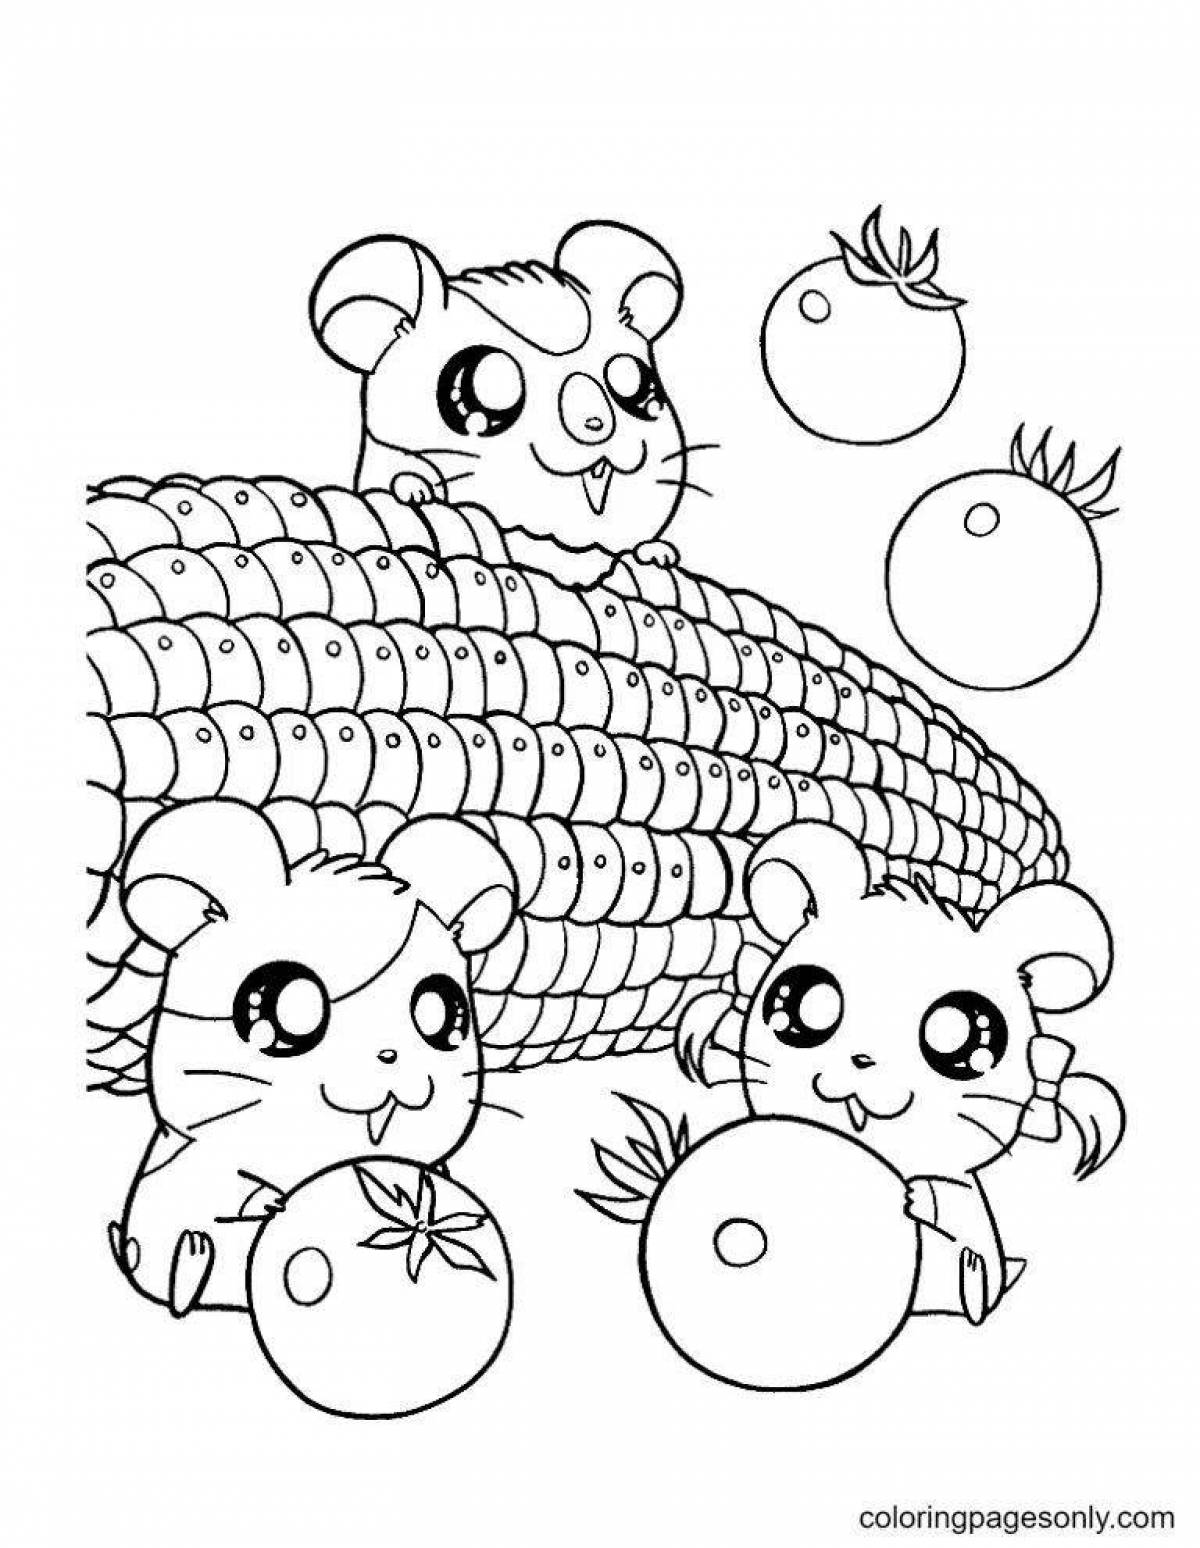 Cute hamster coloring pages